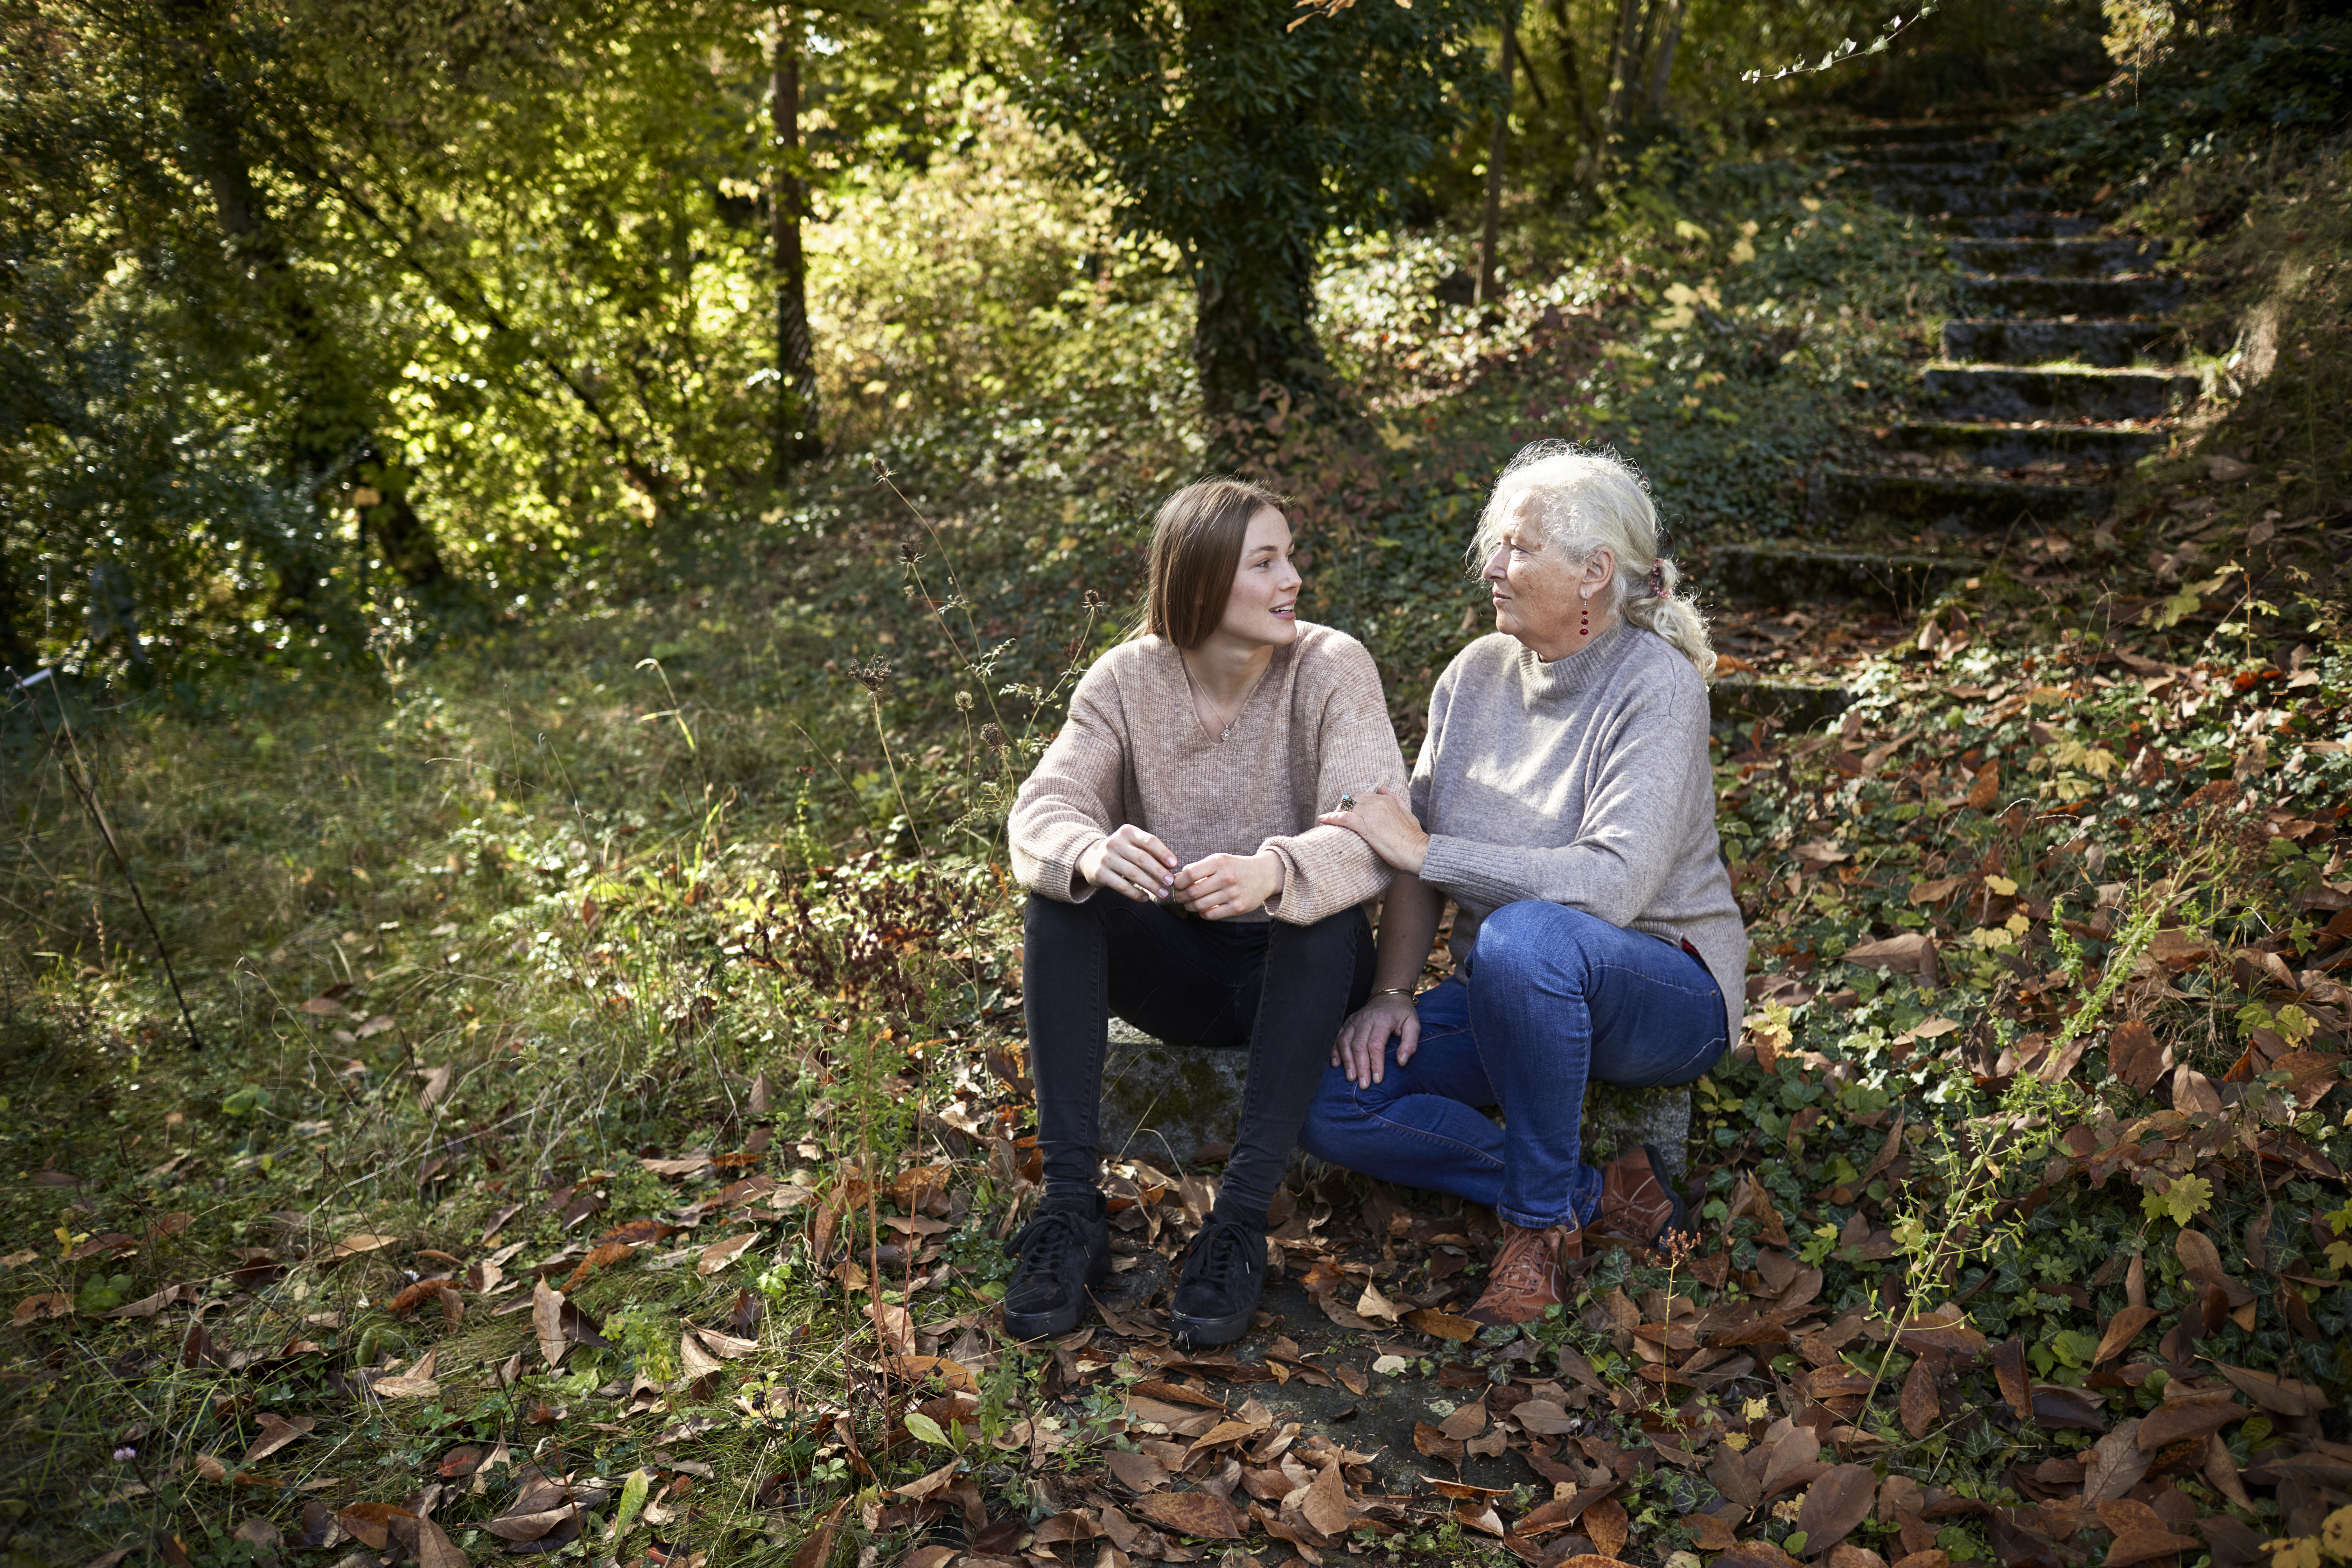 Grandmother and adult granddaughter sitting in autumnal garden | Source: Getty Images